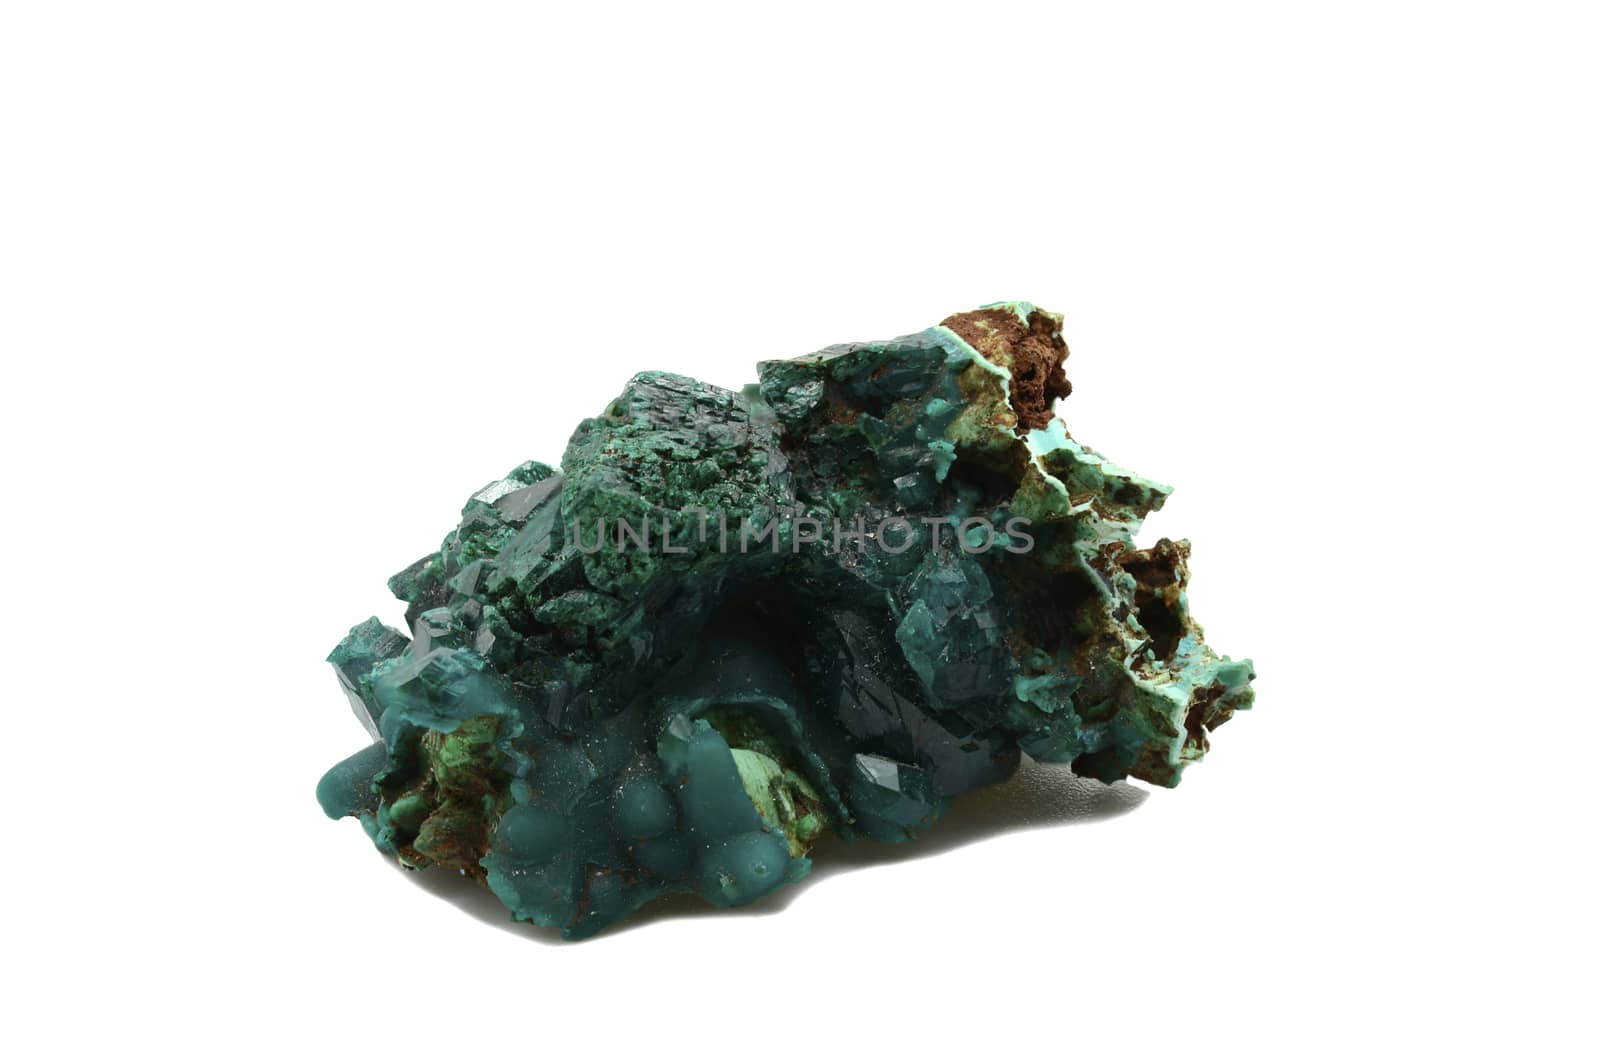 Sample of a beautiful Dioptase specimen isolated on white background